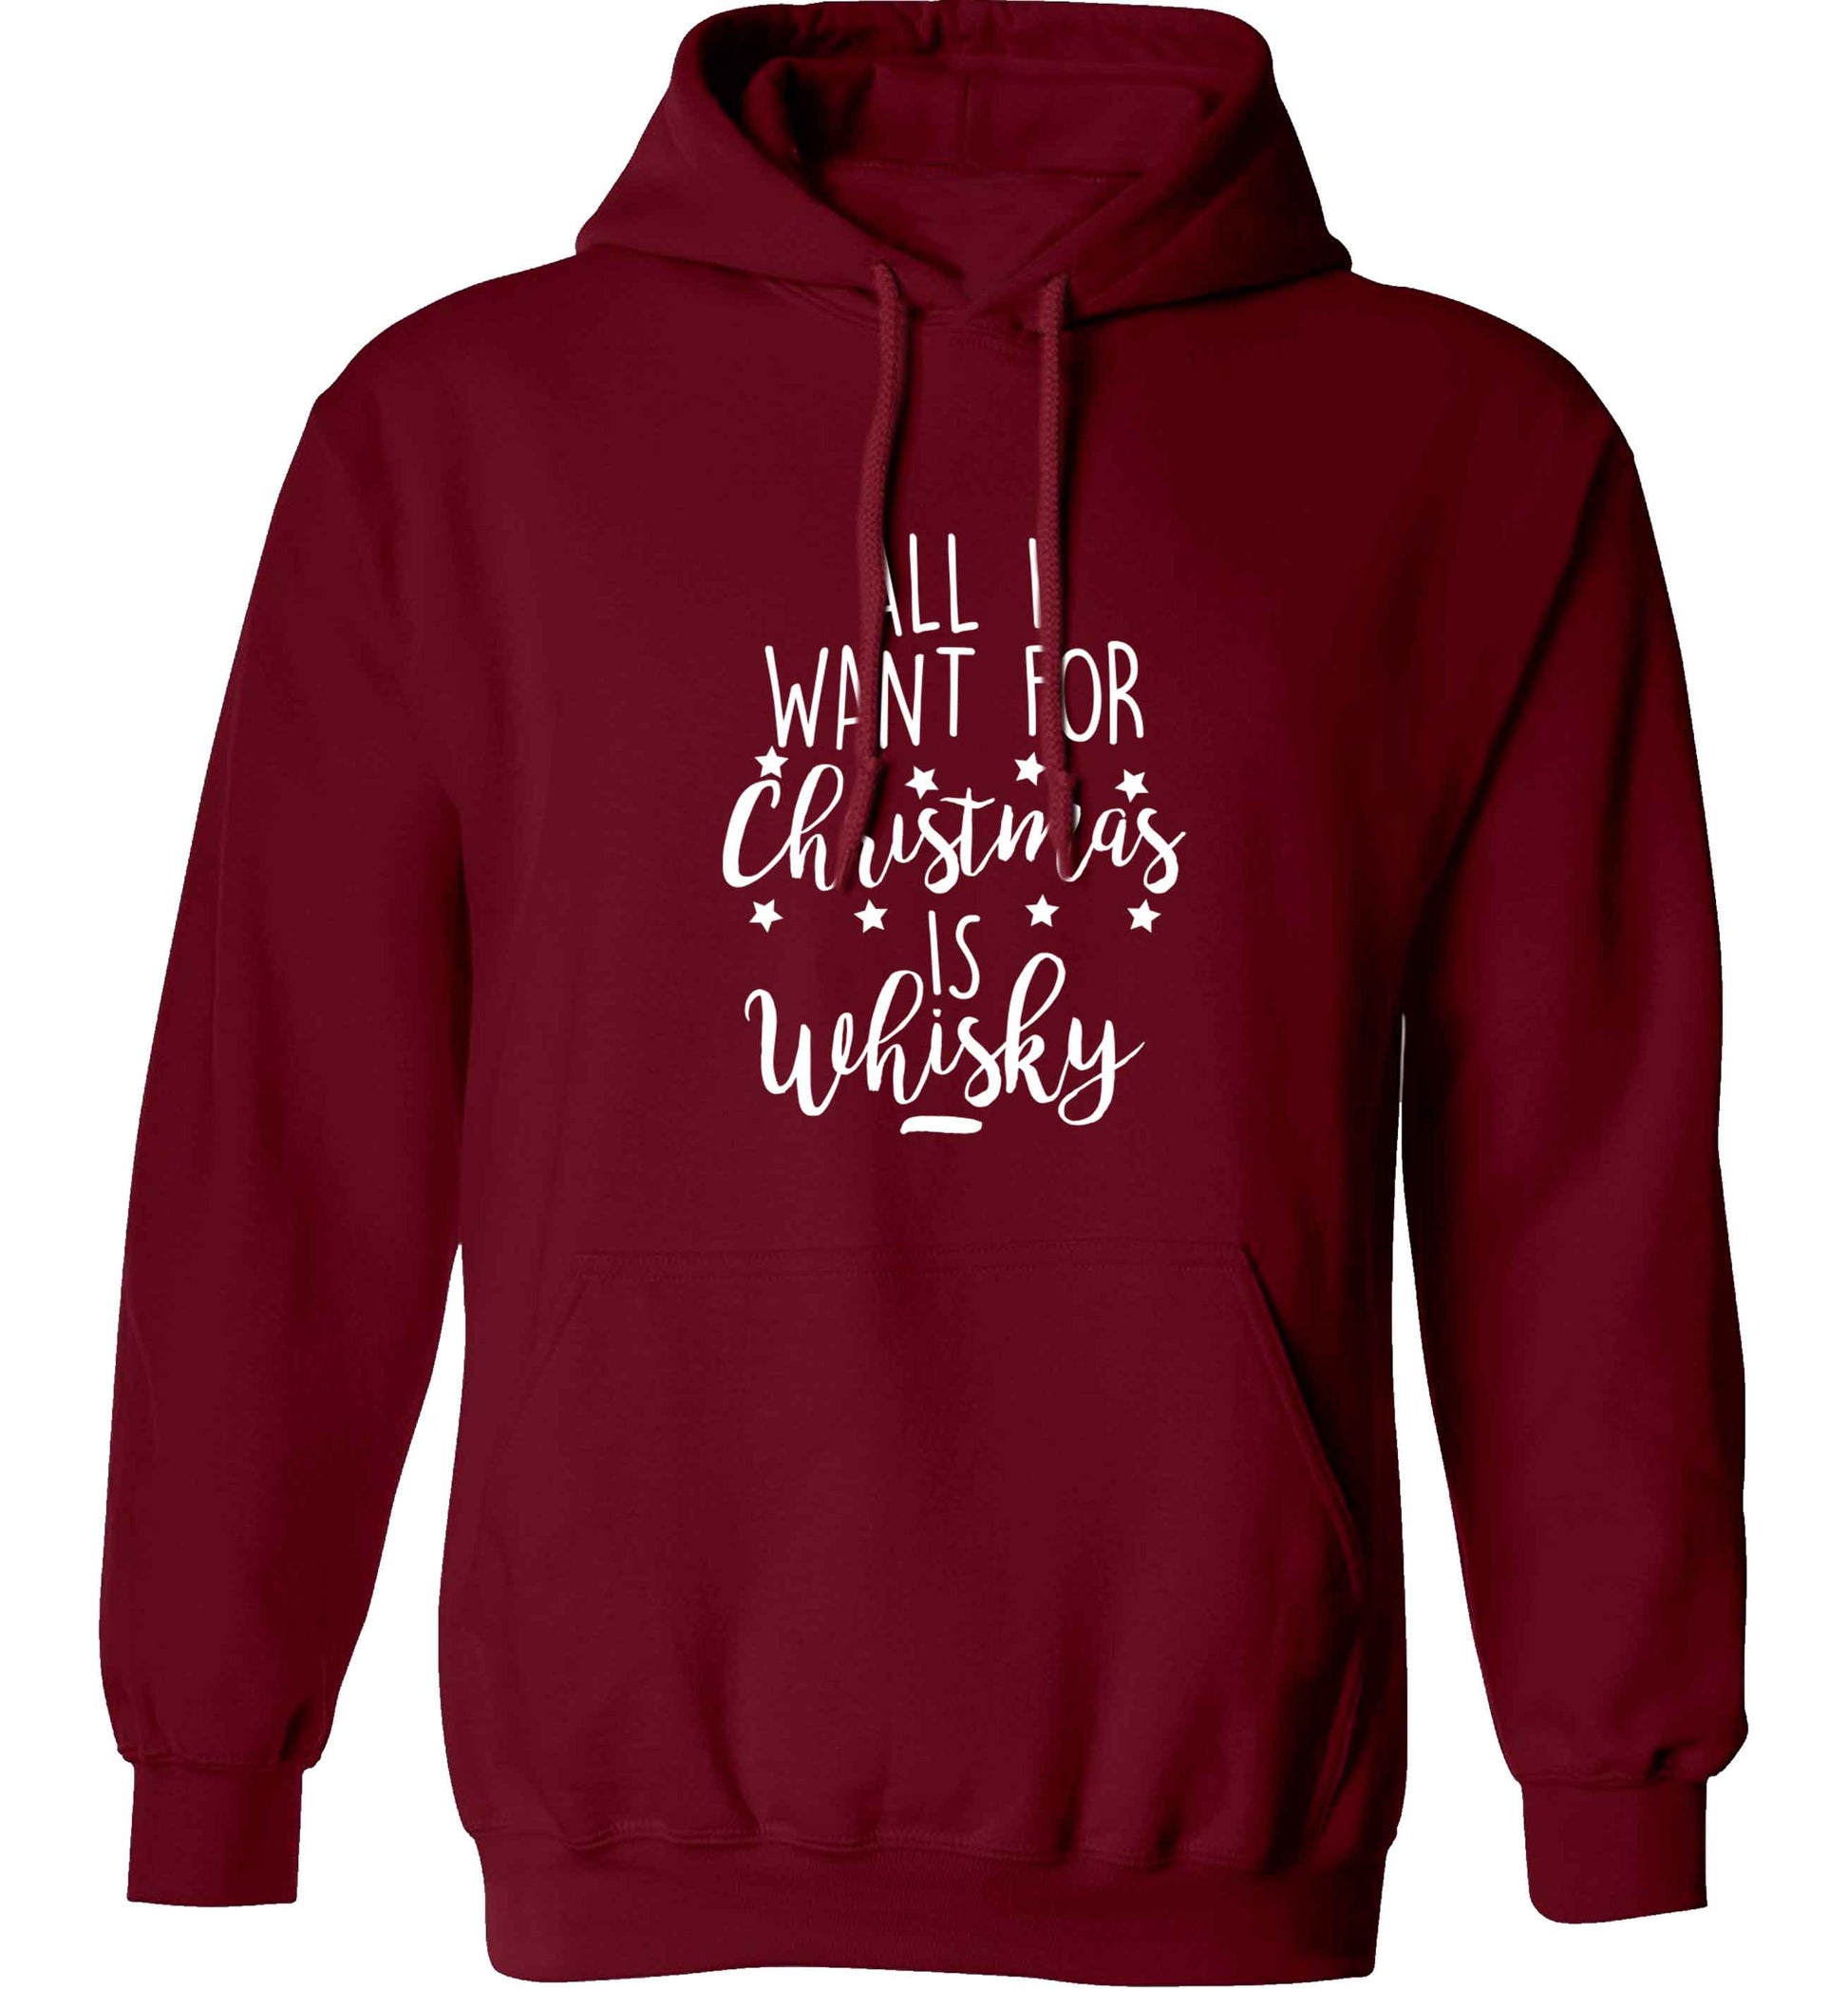 All I want for Christmas is whisky adults unisex maroon hoodie 2XL